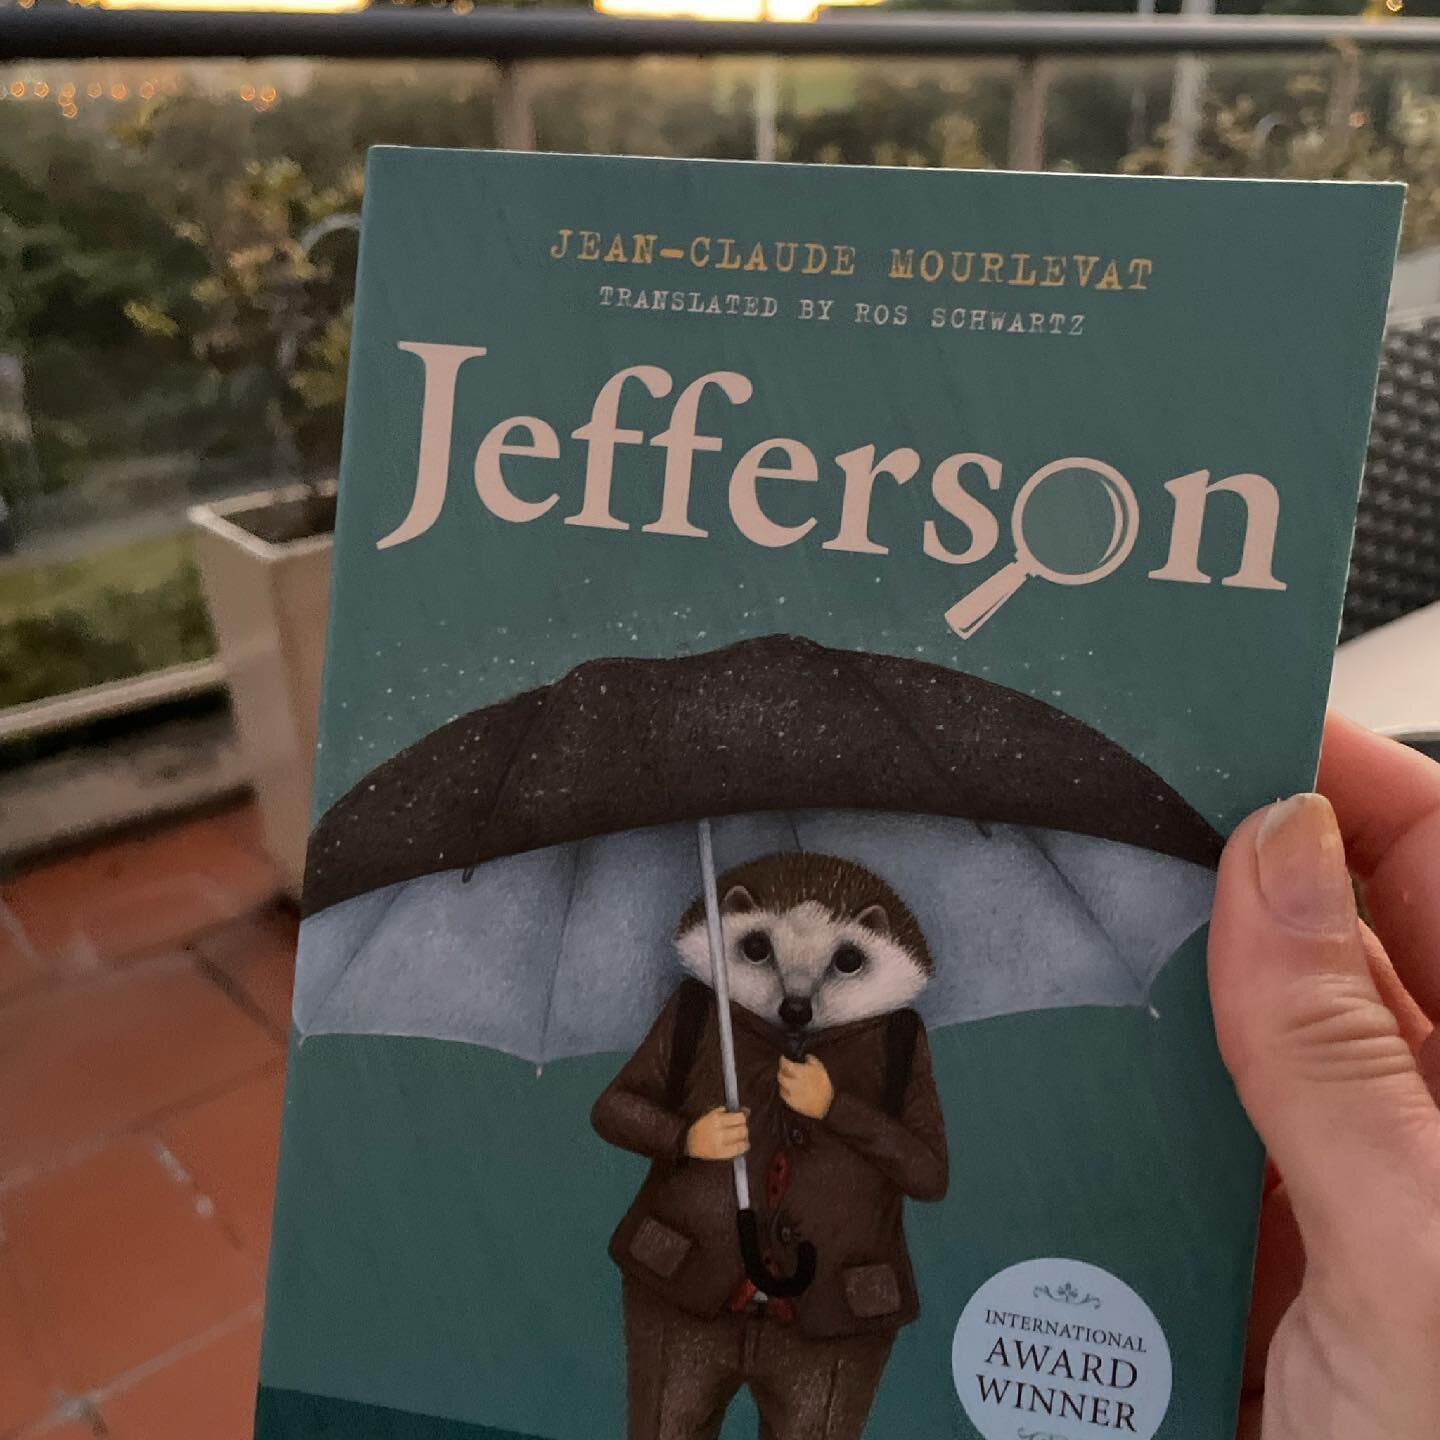 Natalie&rsquo;s 32nd book of 2021 #jefferson